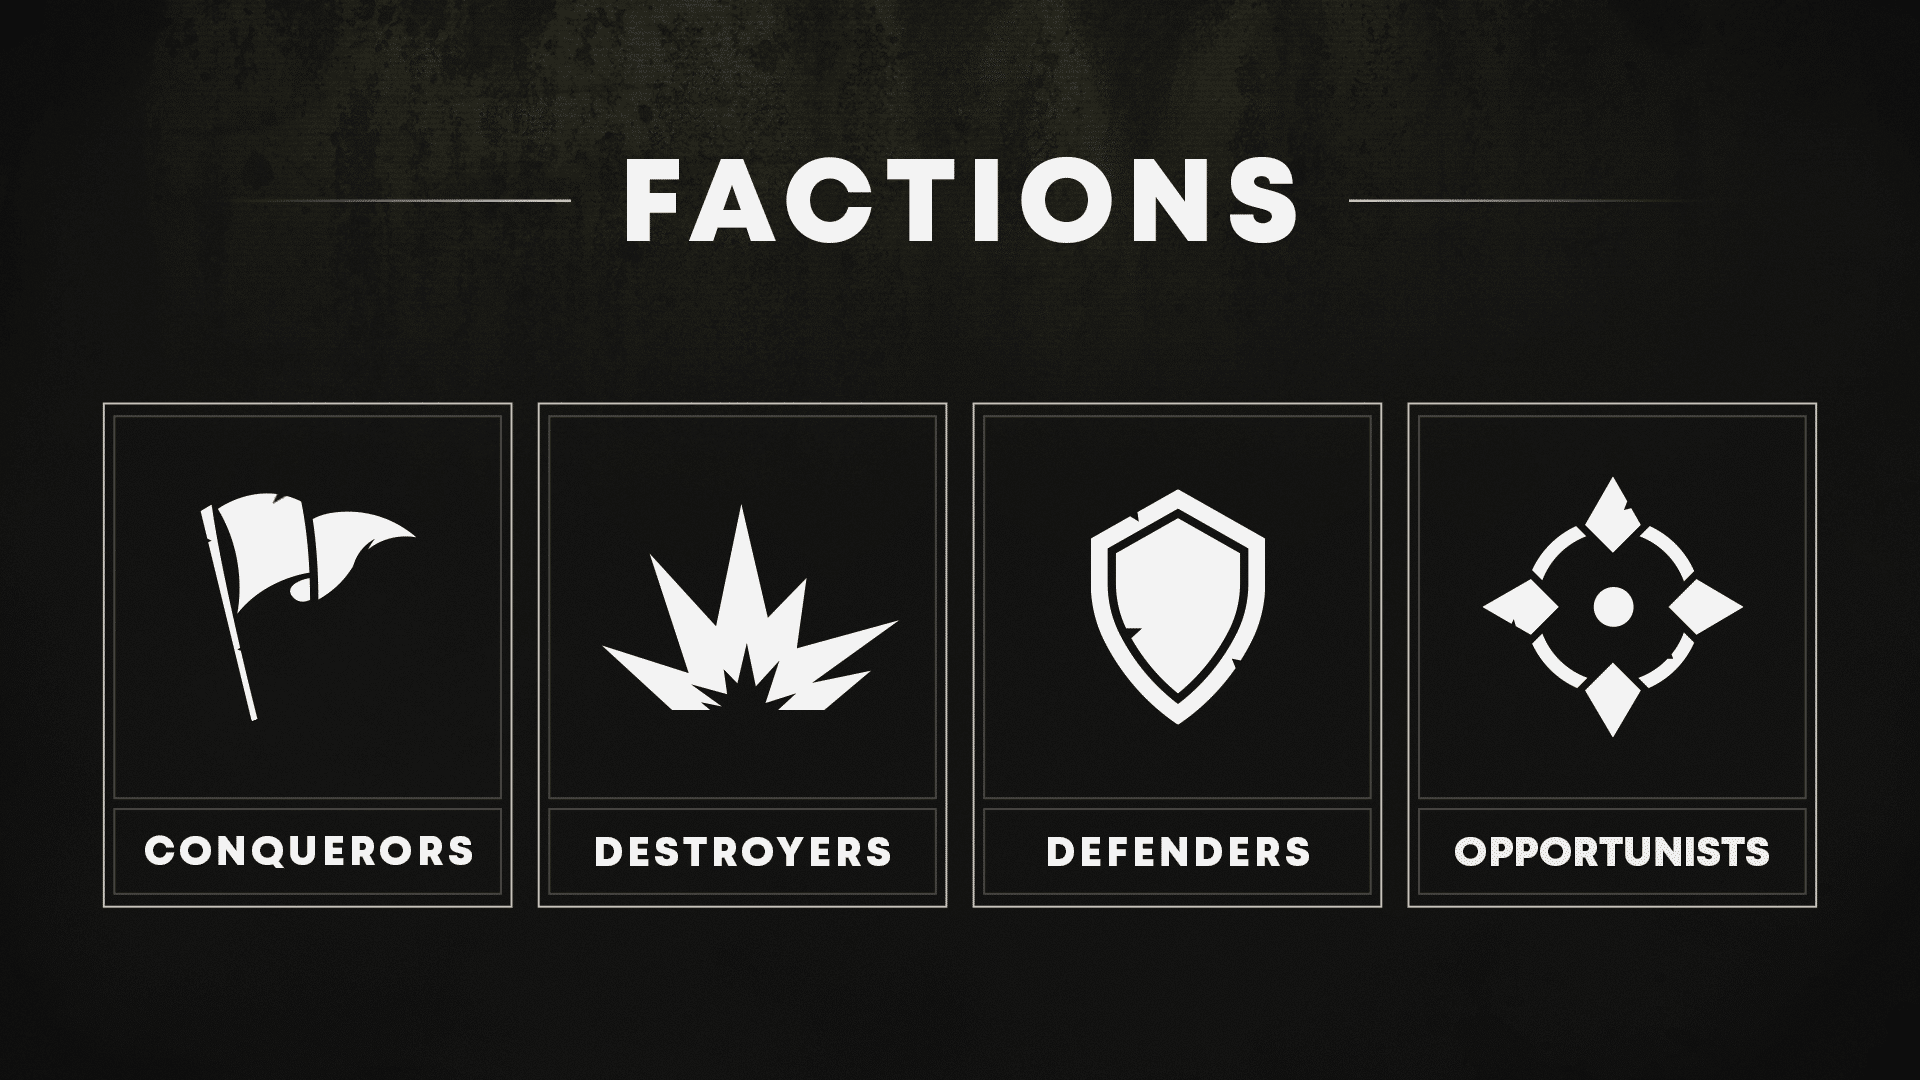 The Factions of Zephrys